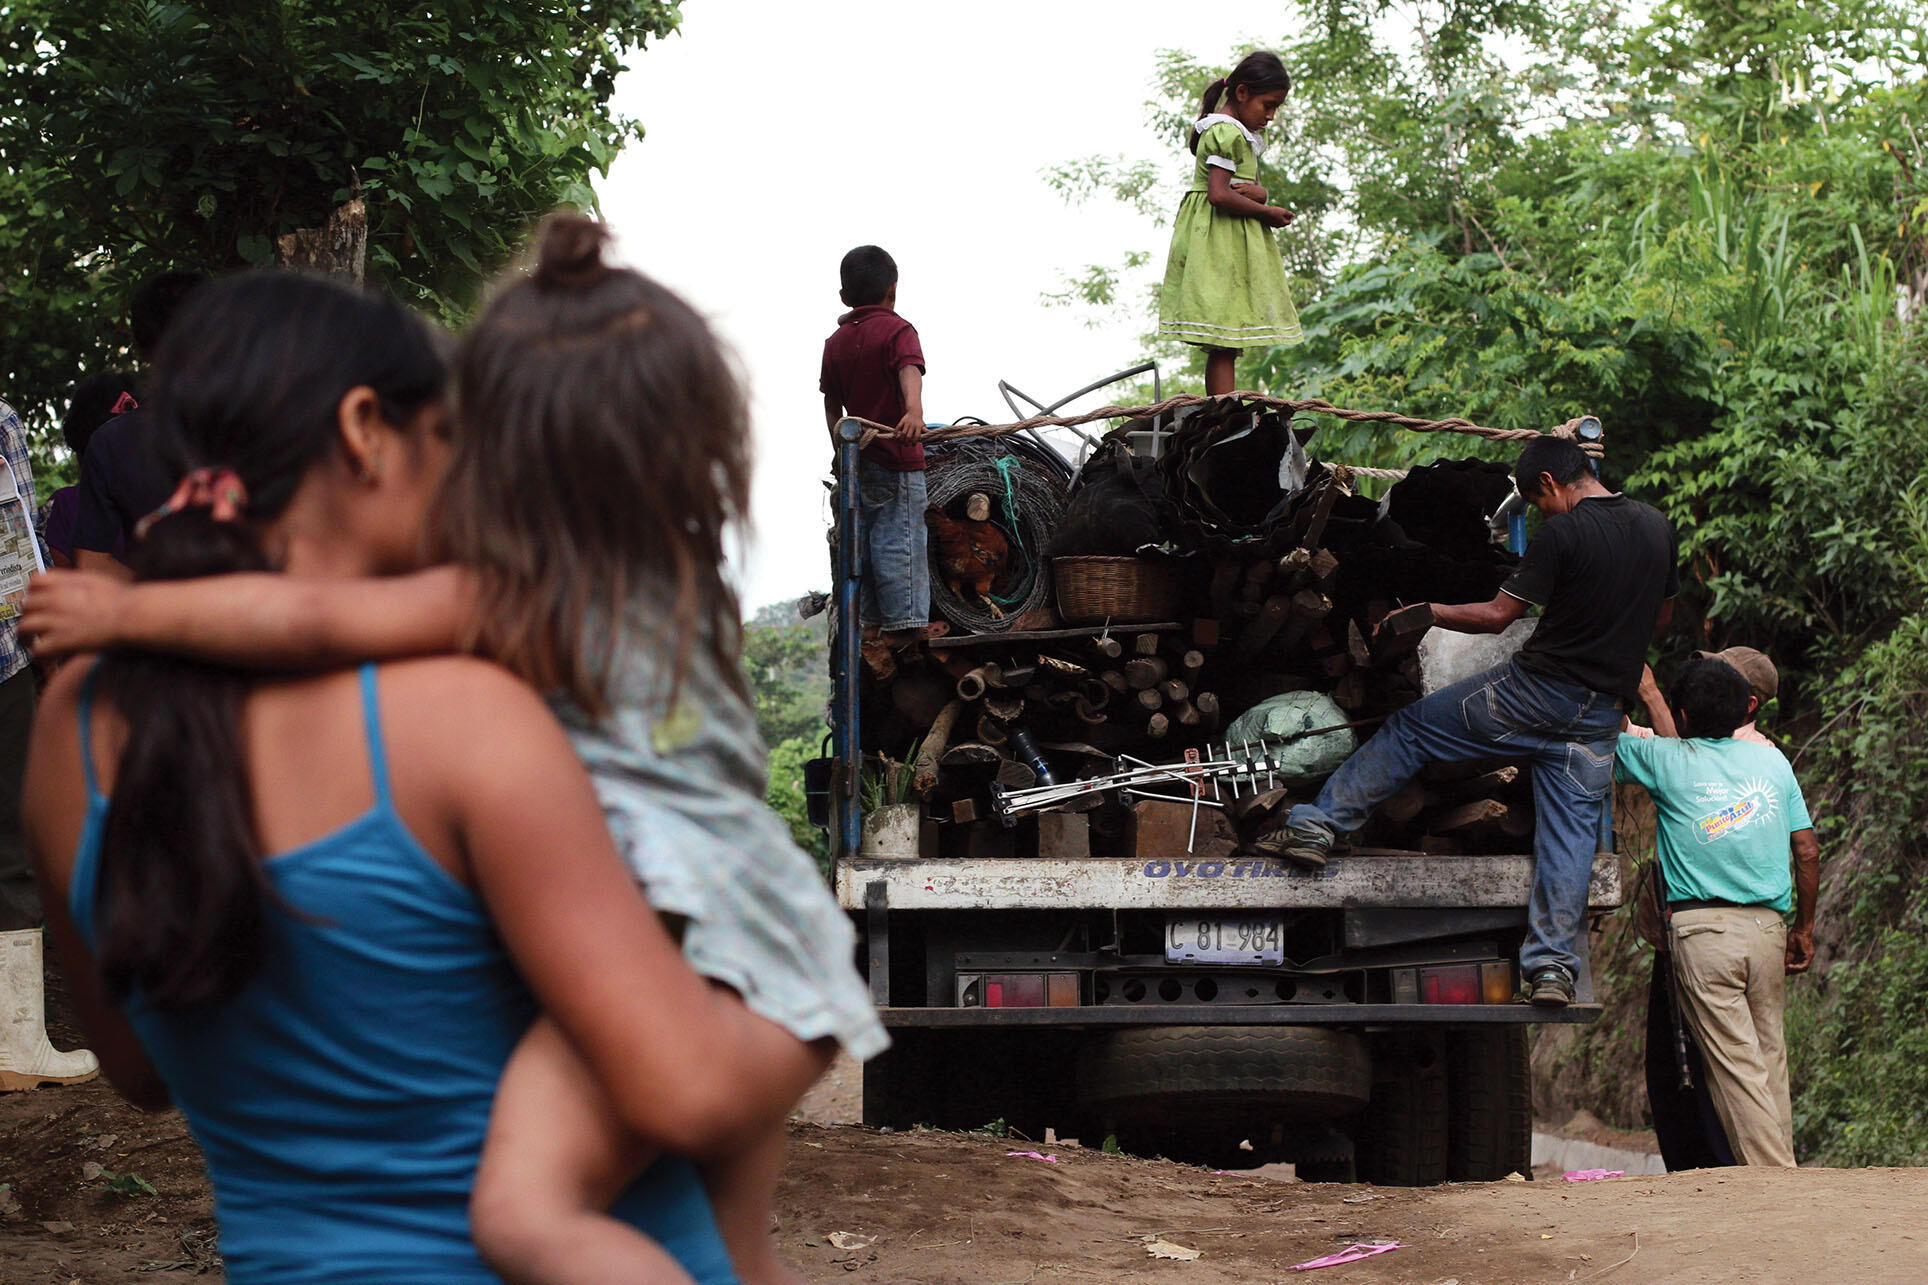 A woman watches neighbors loading possessions on a truck as they flee their homes following gang threats in Tunamiles, El Salvador. (Photo by Salvador Melendez/AP Photo.)